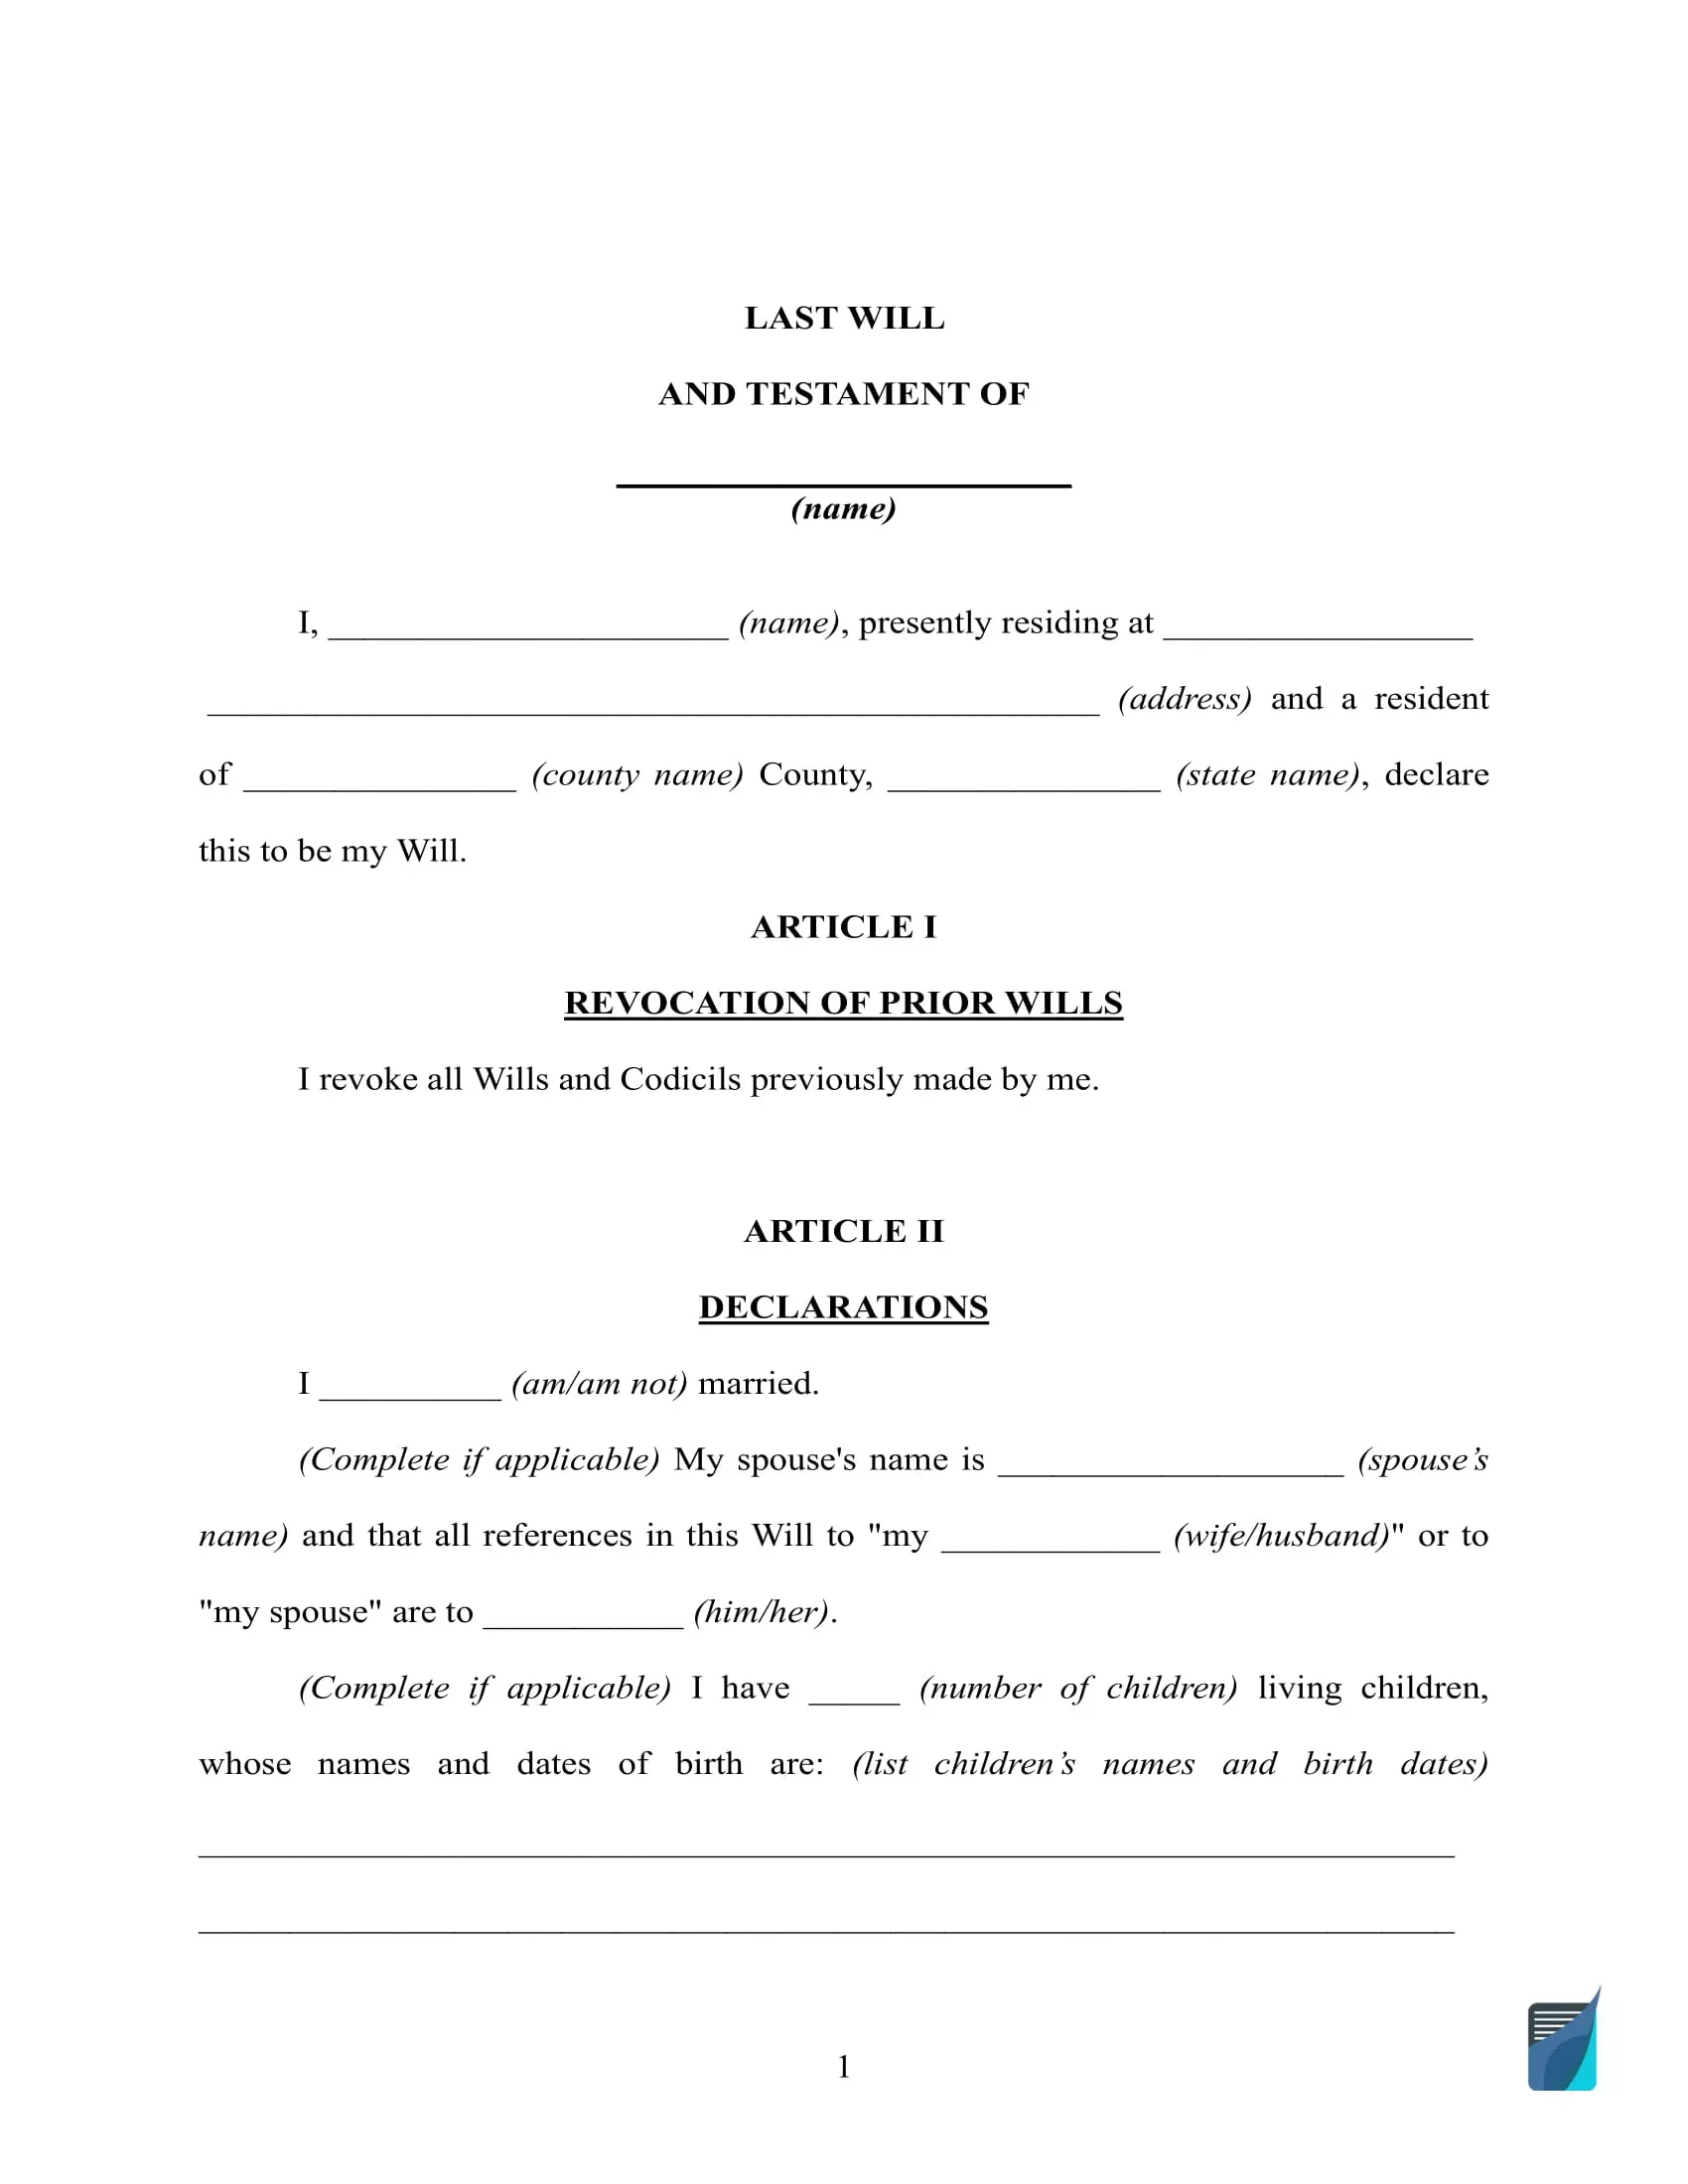 Free Last Will And Testament Template ⇒ Will Forms In Pdf And Doc - Free Forms For Wills